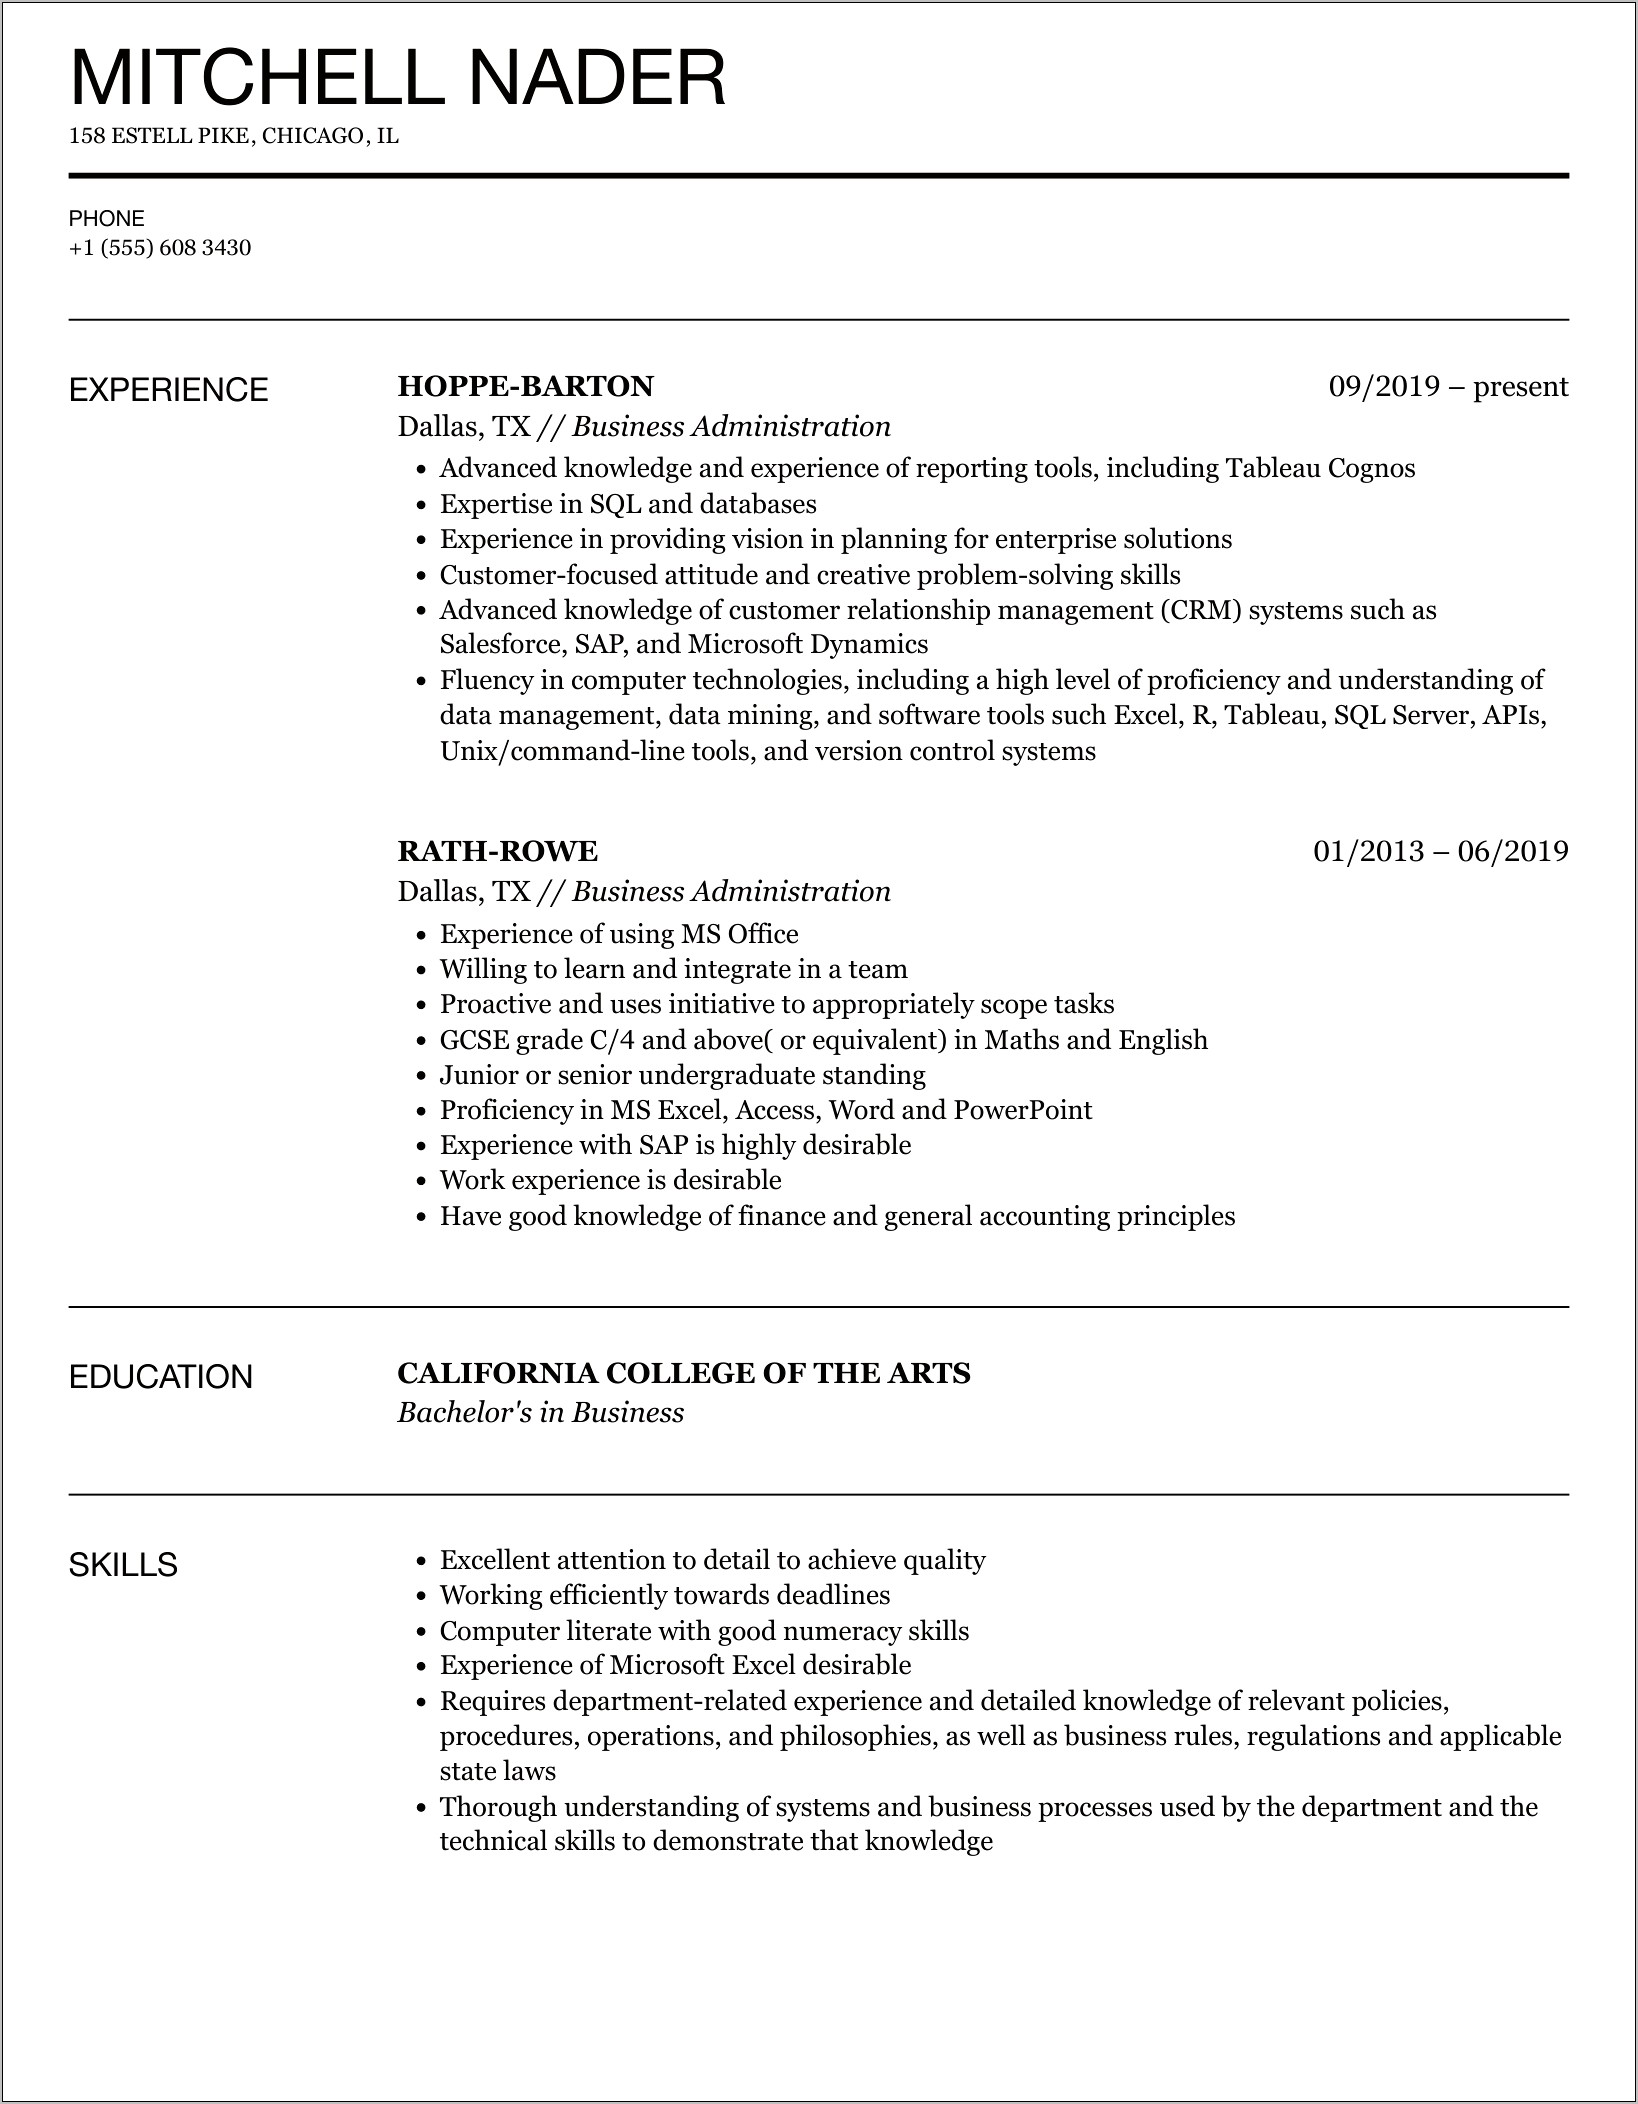 Resume Sample For Abroad Jobs